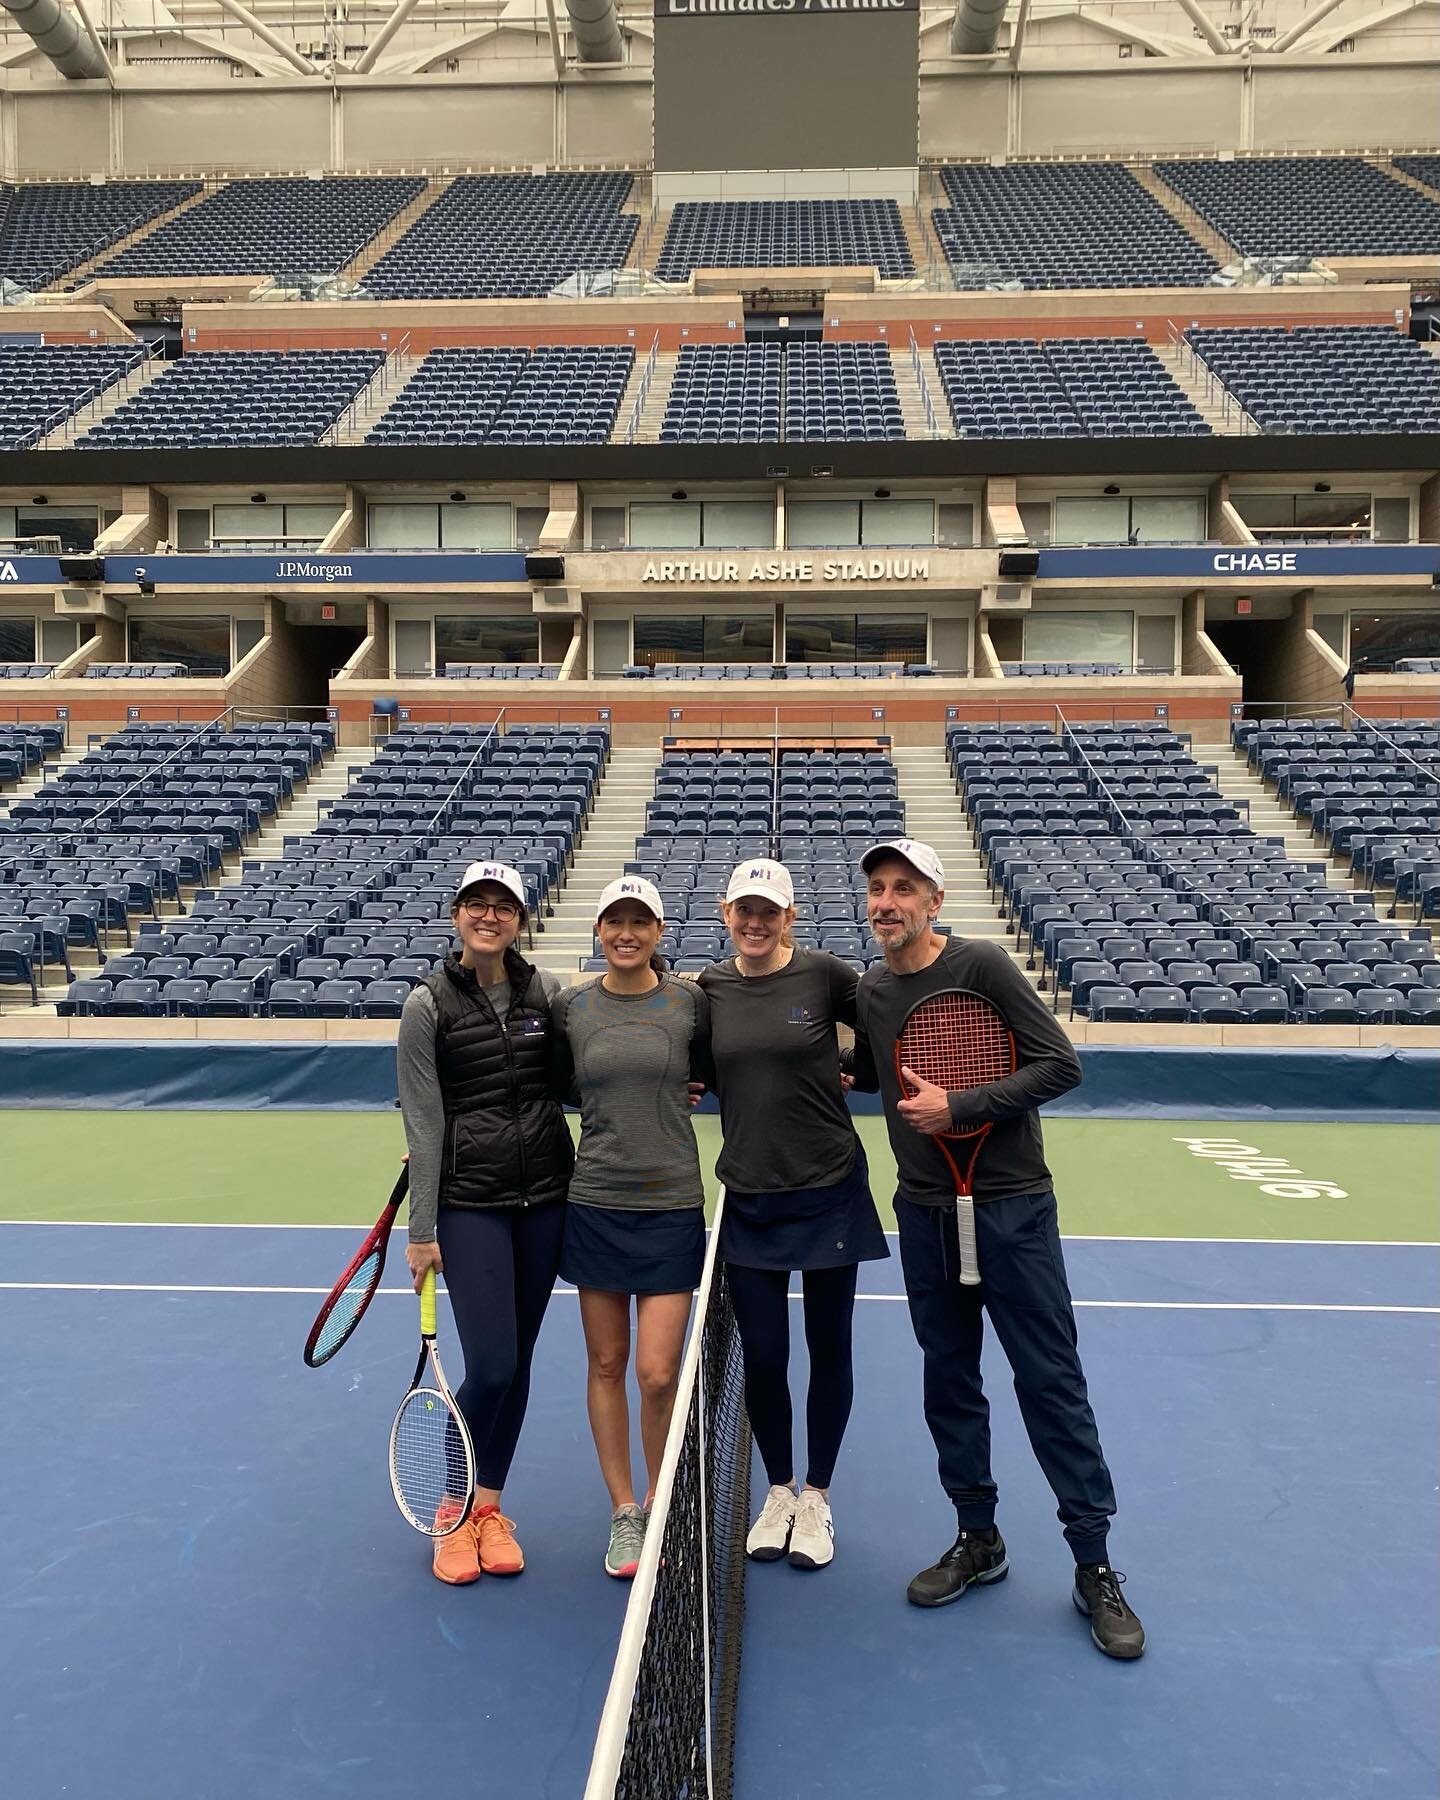 Bucketlist item ✅. 

Murray Hill Tennis&rsquo; ownership team recently took to Arthur Ashe Stadium for a special private hitting session. A special thanks to the @USTAFoundation for coordinating. What a highlight and complete goosebumps moment! 🙌🎾?